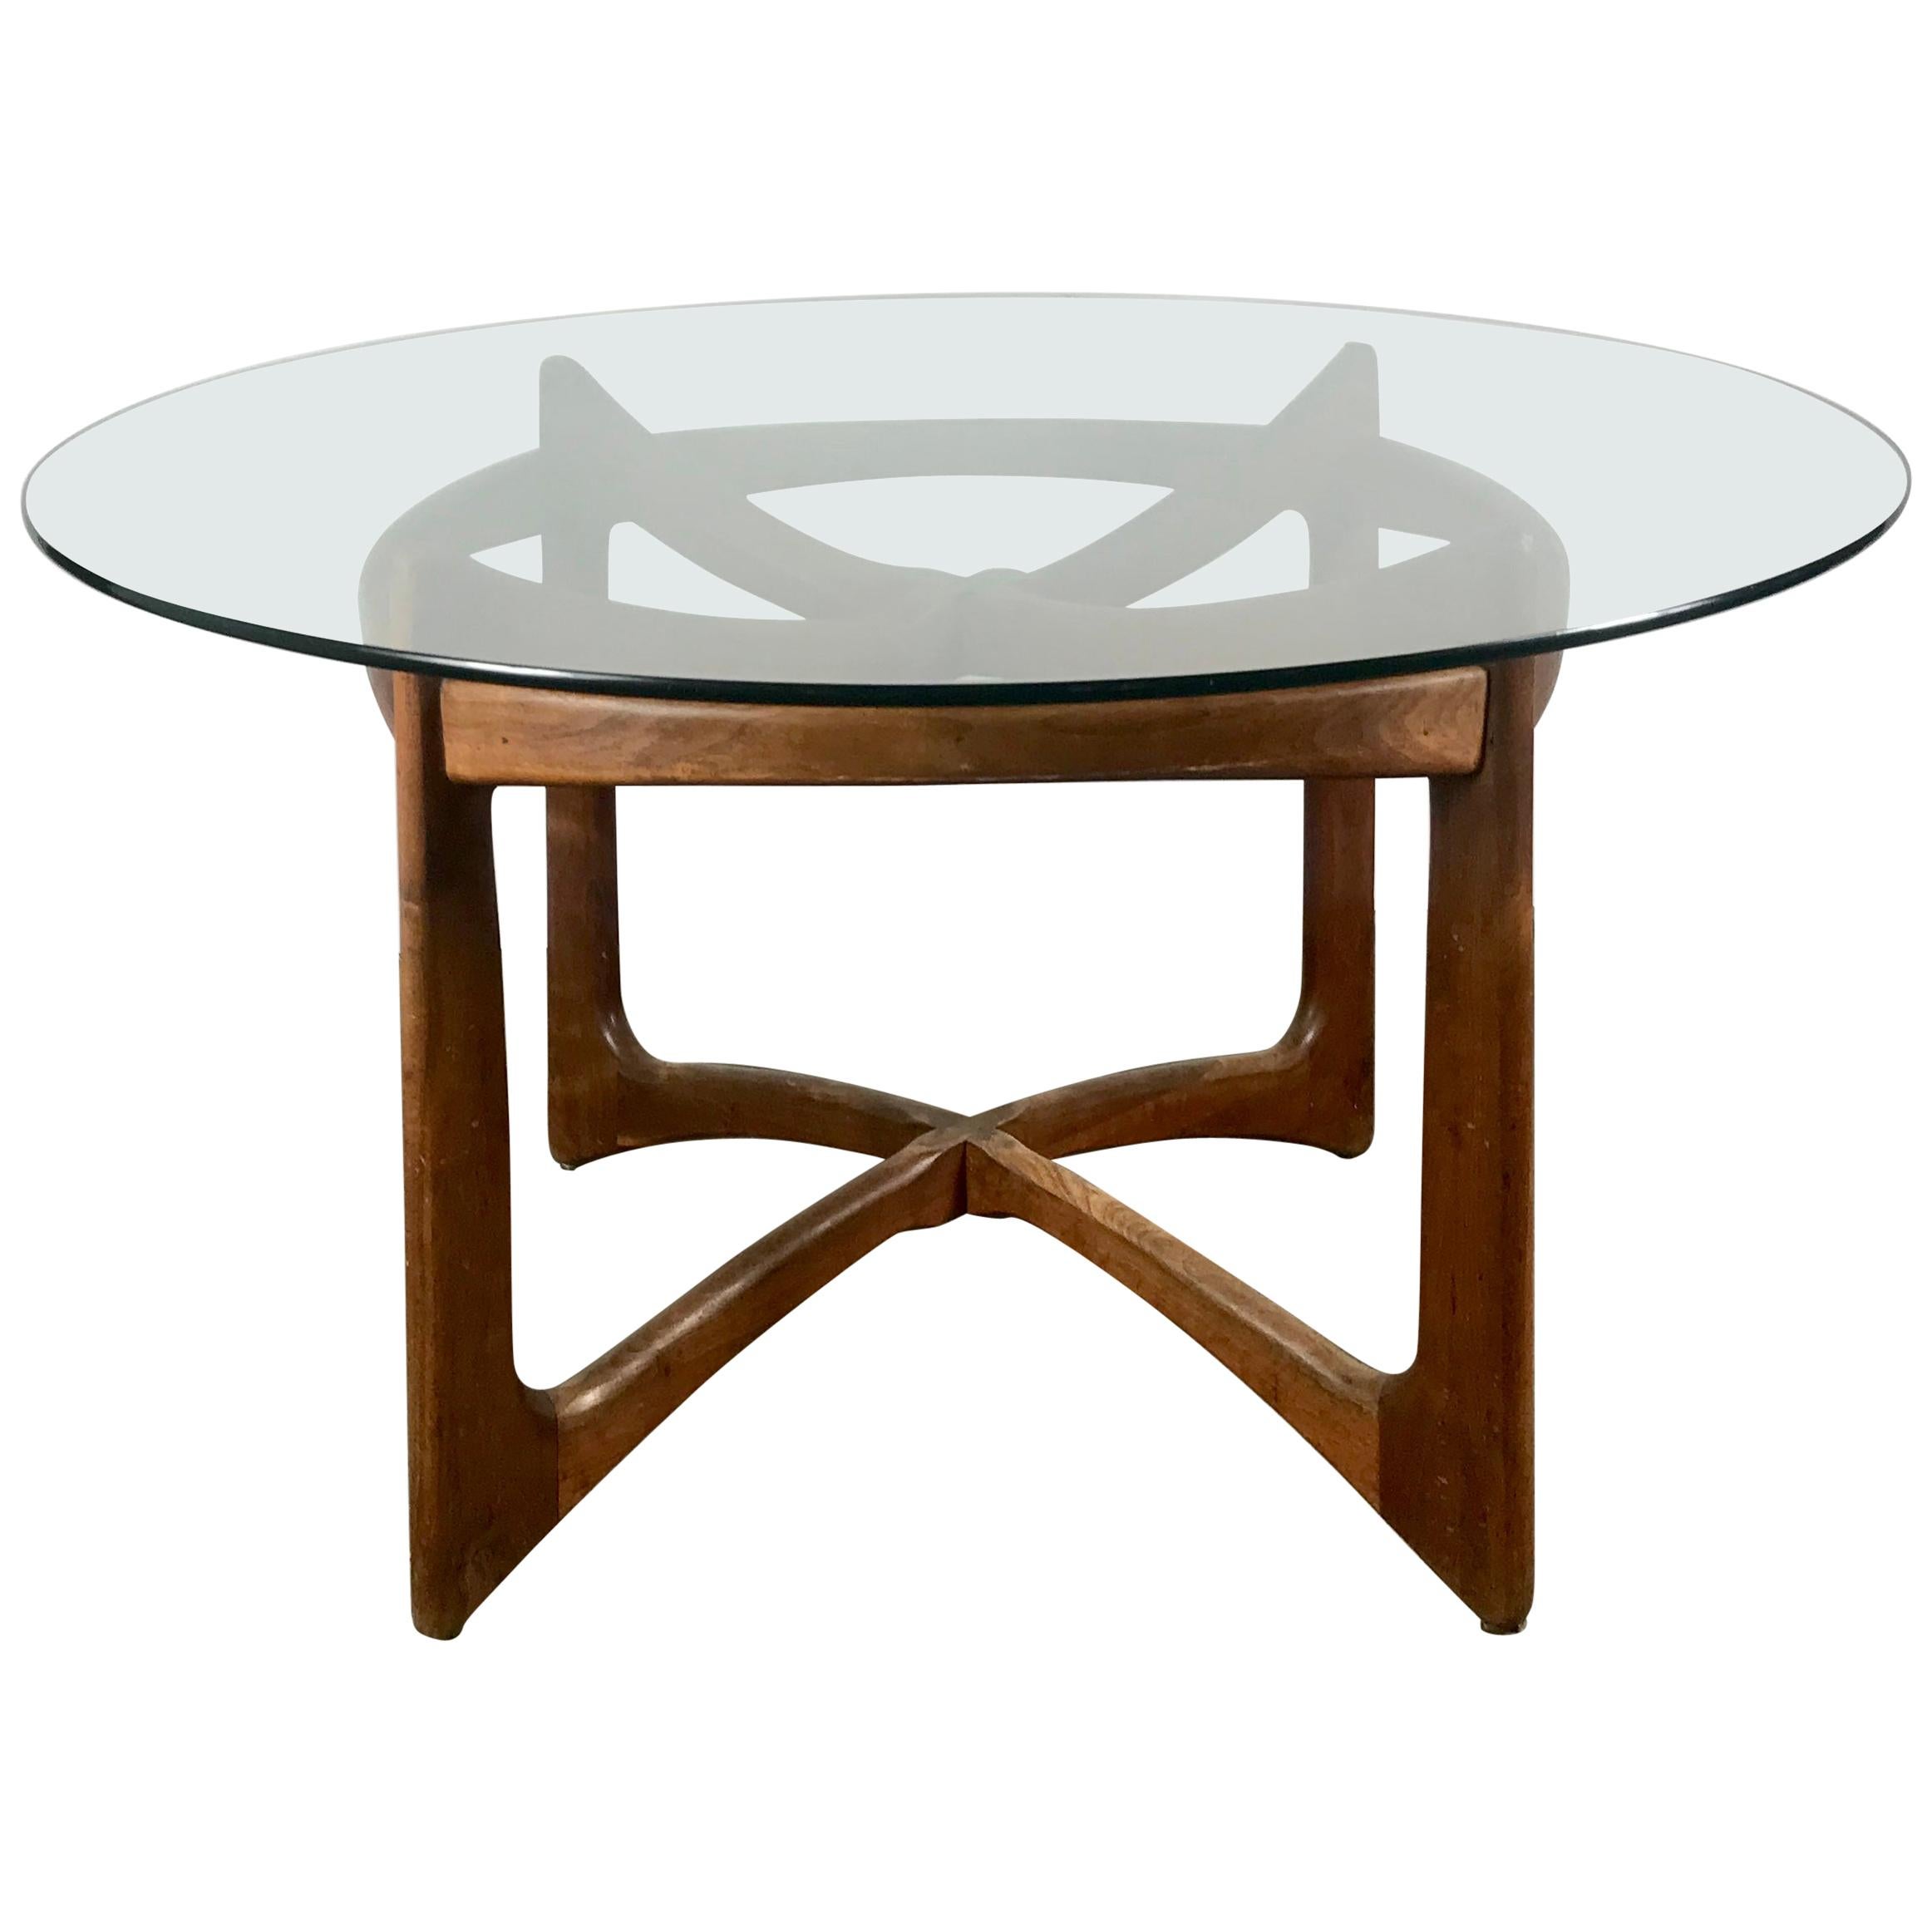 Classic Modernist Adrian Pearsall for Craft Associates Walnut Dining Table